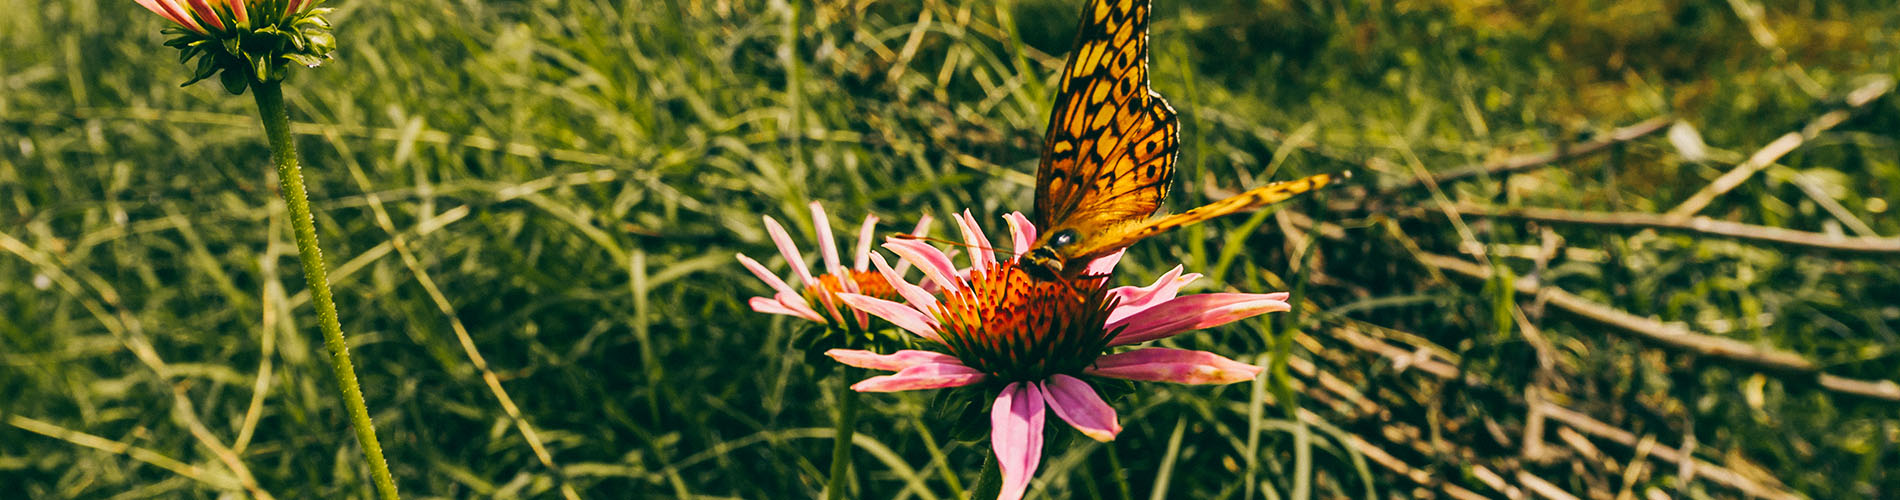 Butterfly on a flower at Pearlstone